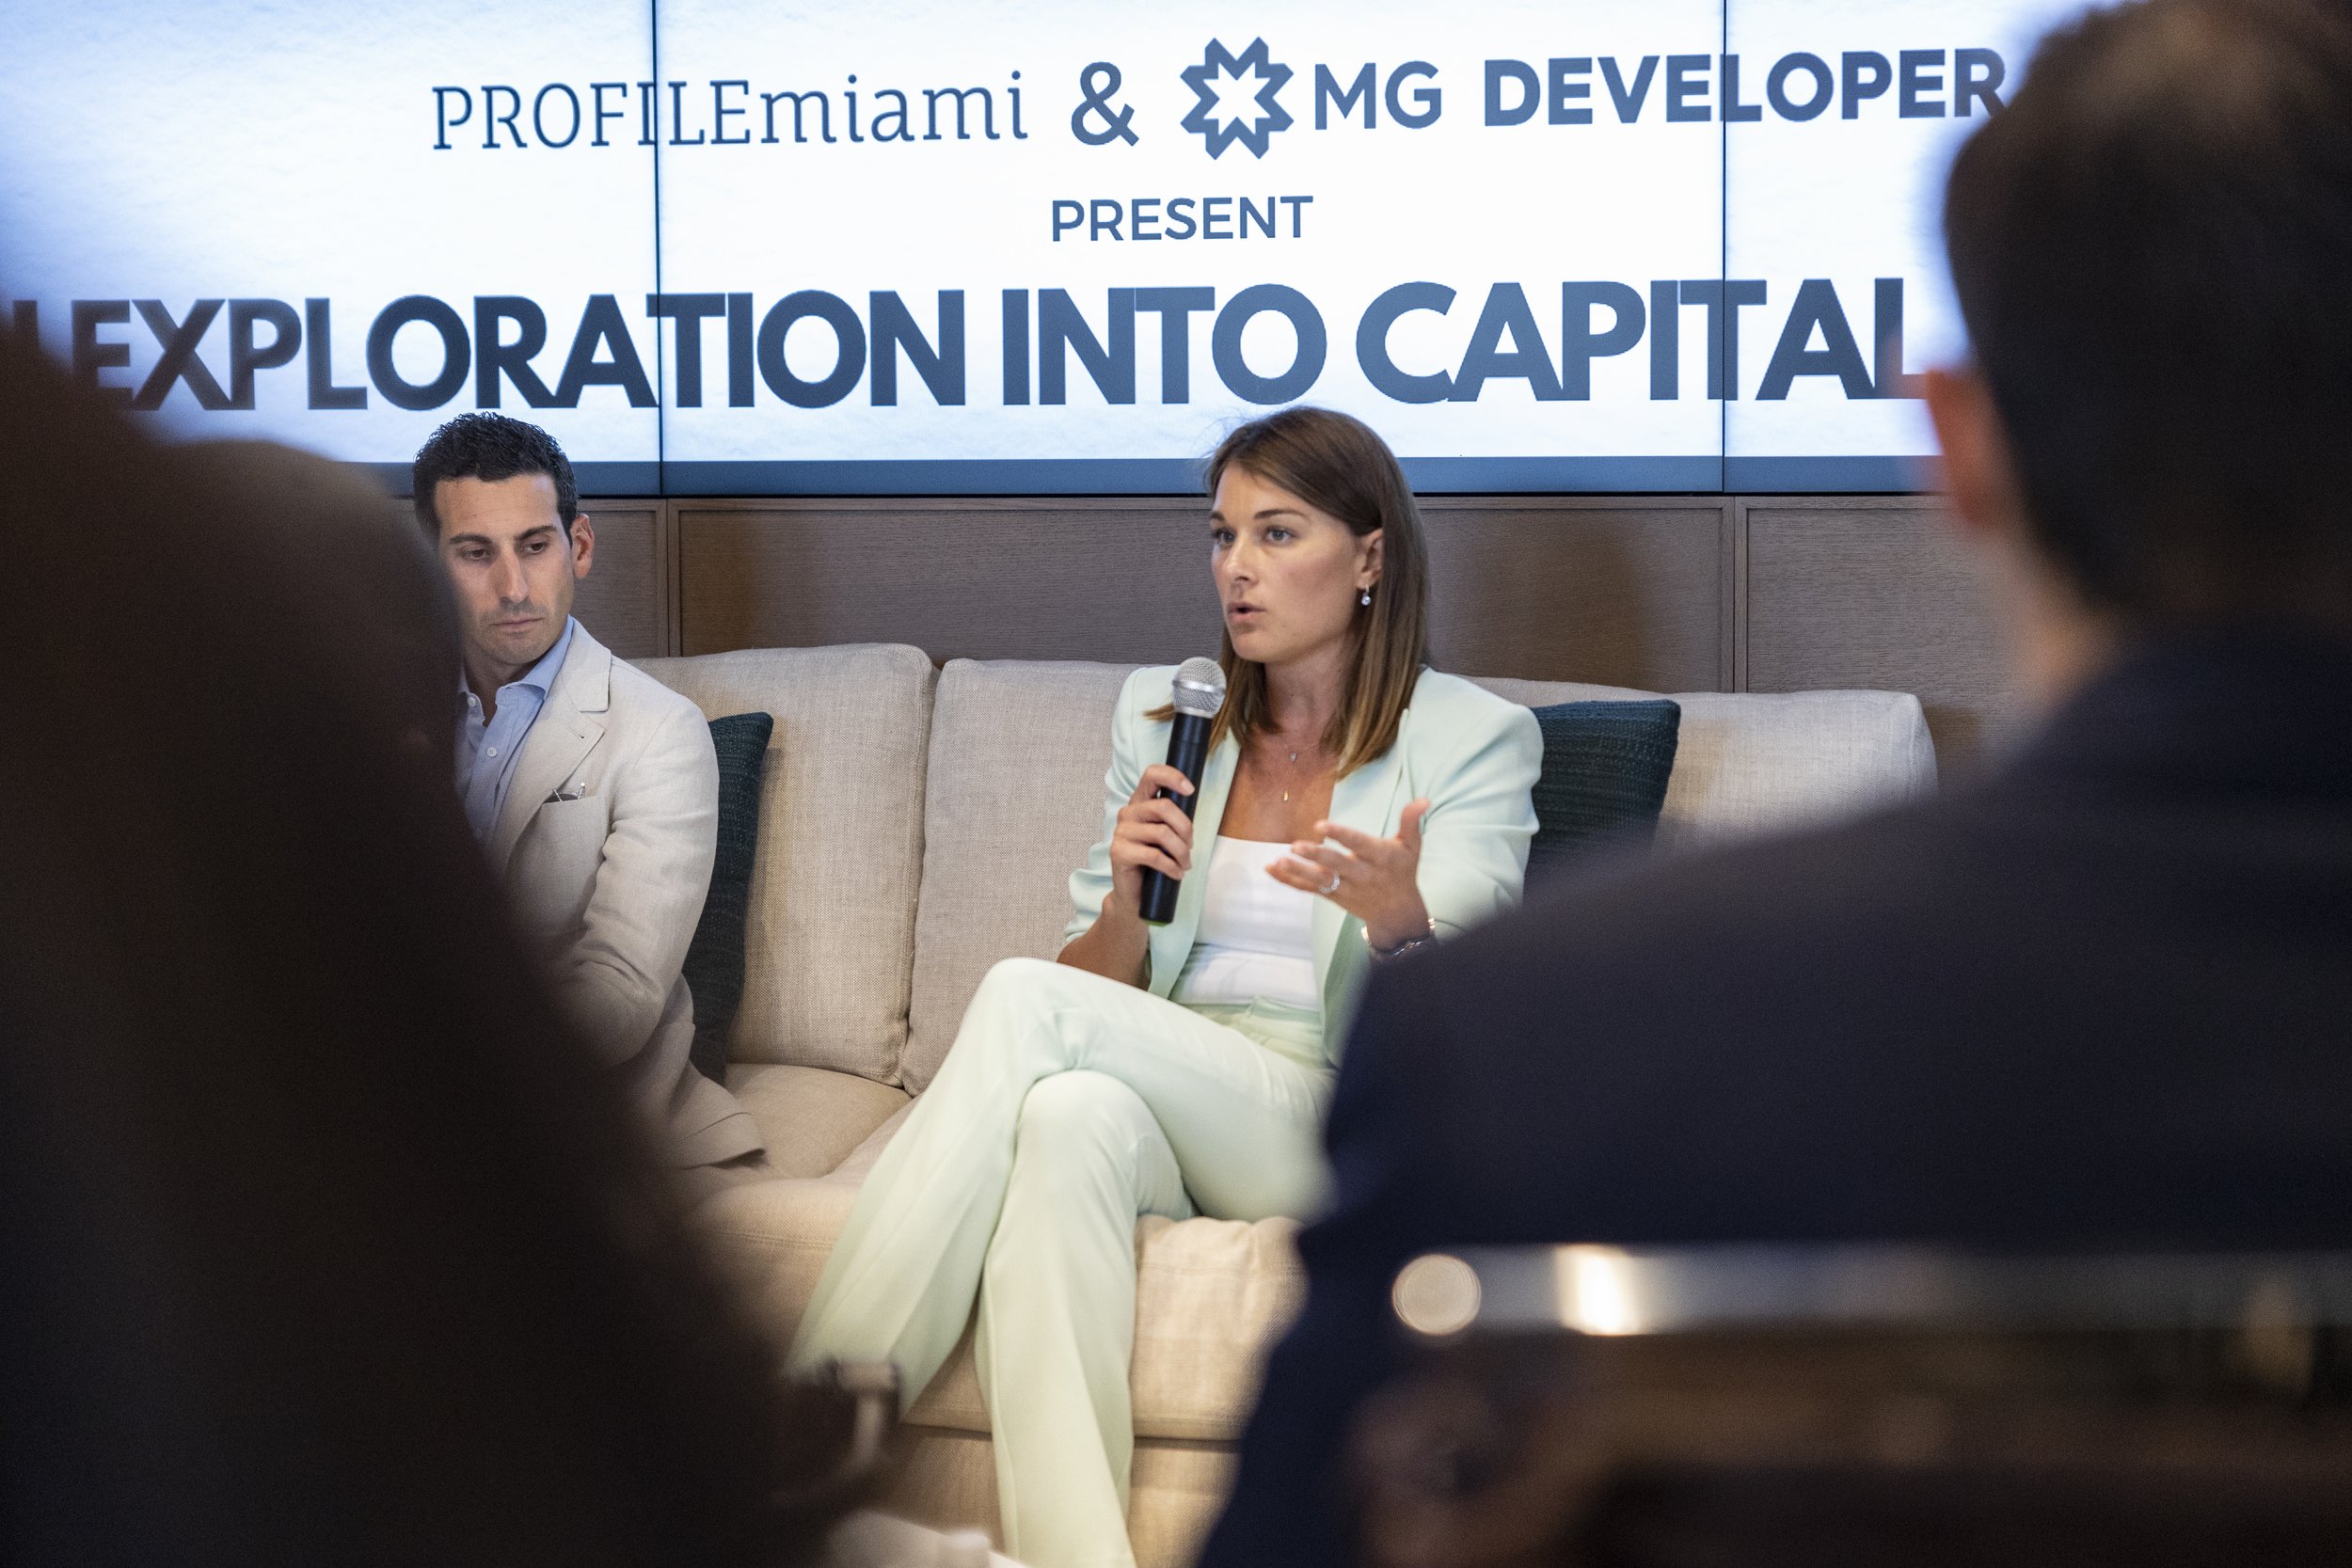 Inside 'An Exploration Into Capital Markets Coral Gables' Presented By PROFILEmiami & MG Developer182.JPG